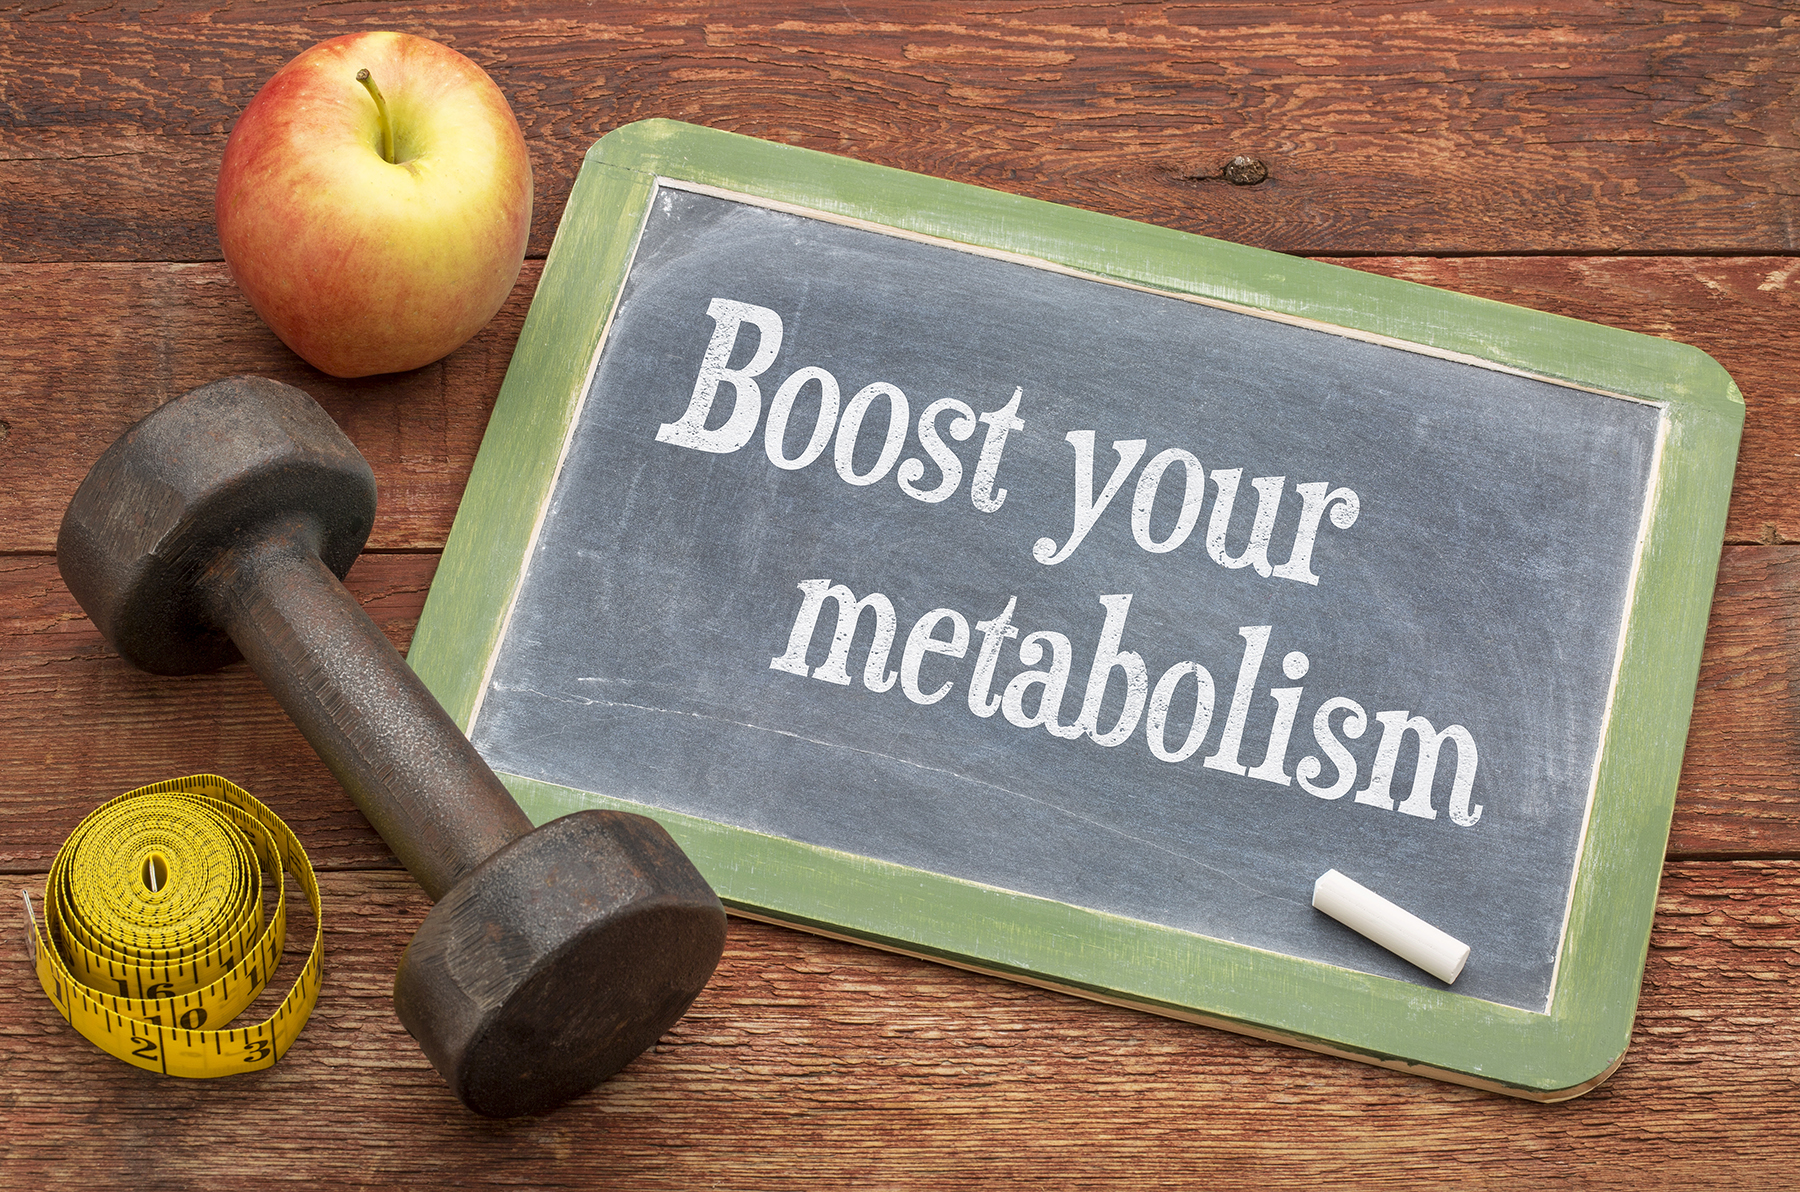 boost your metabolism concept image